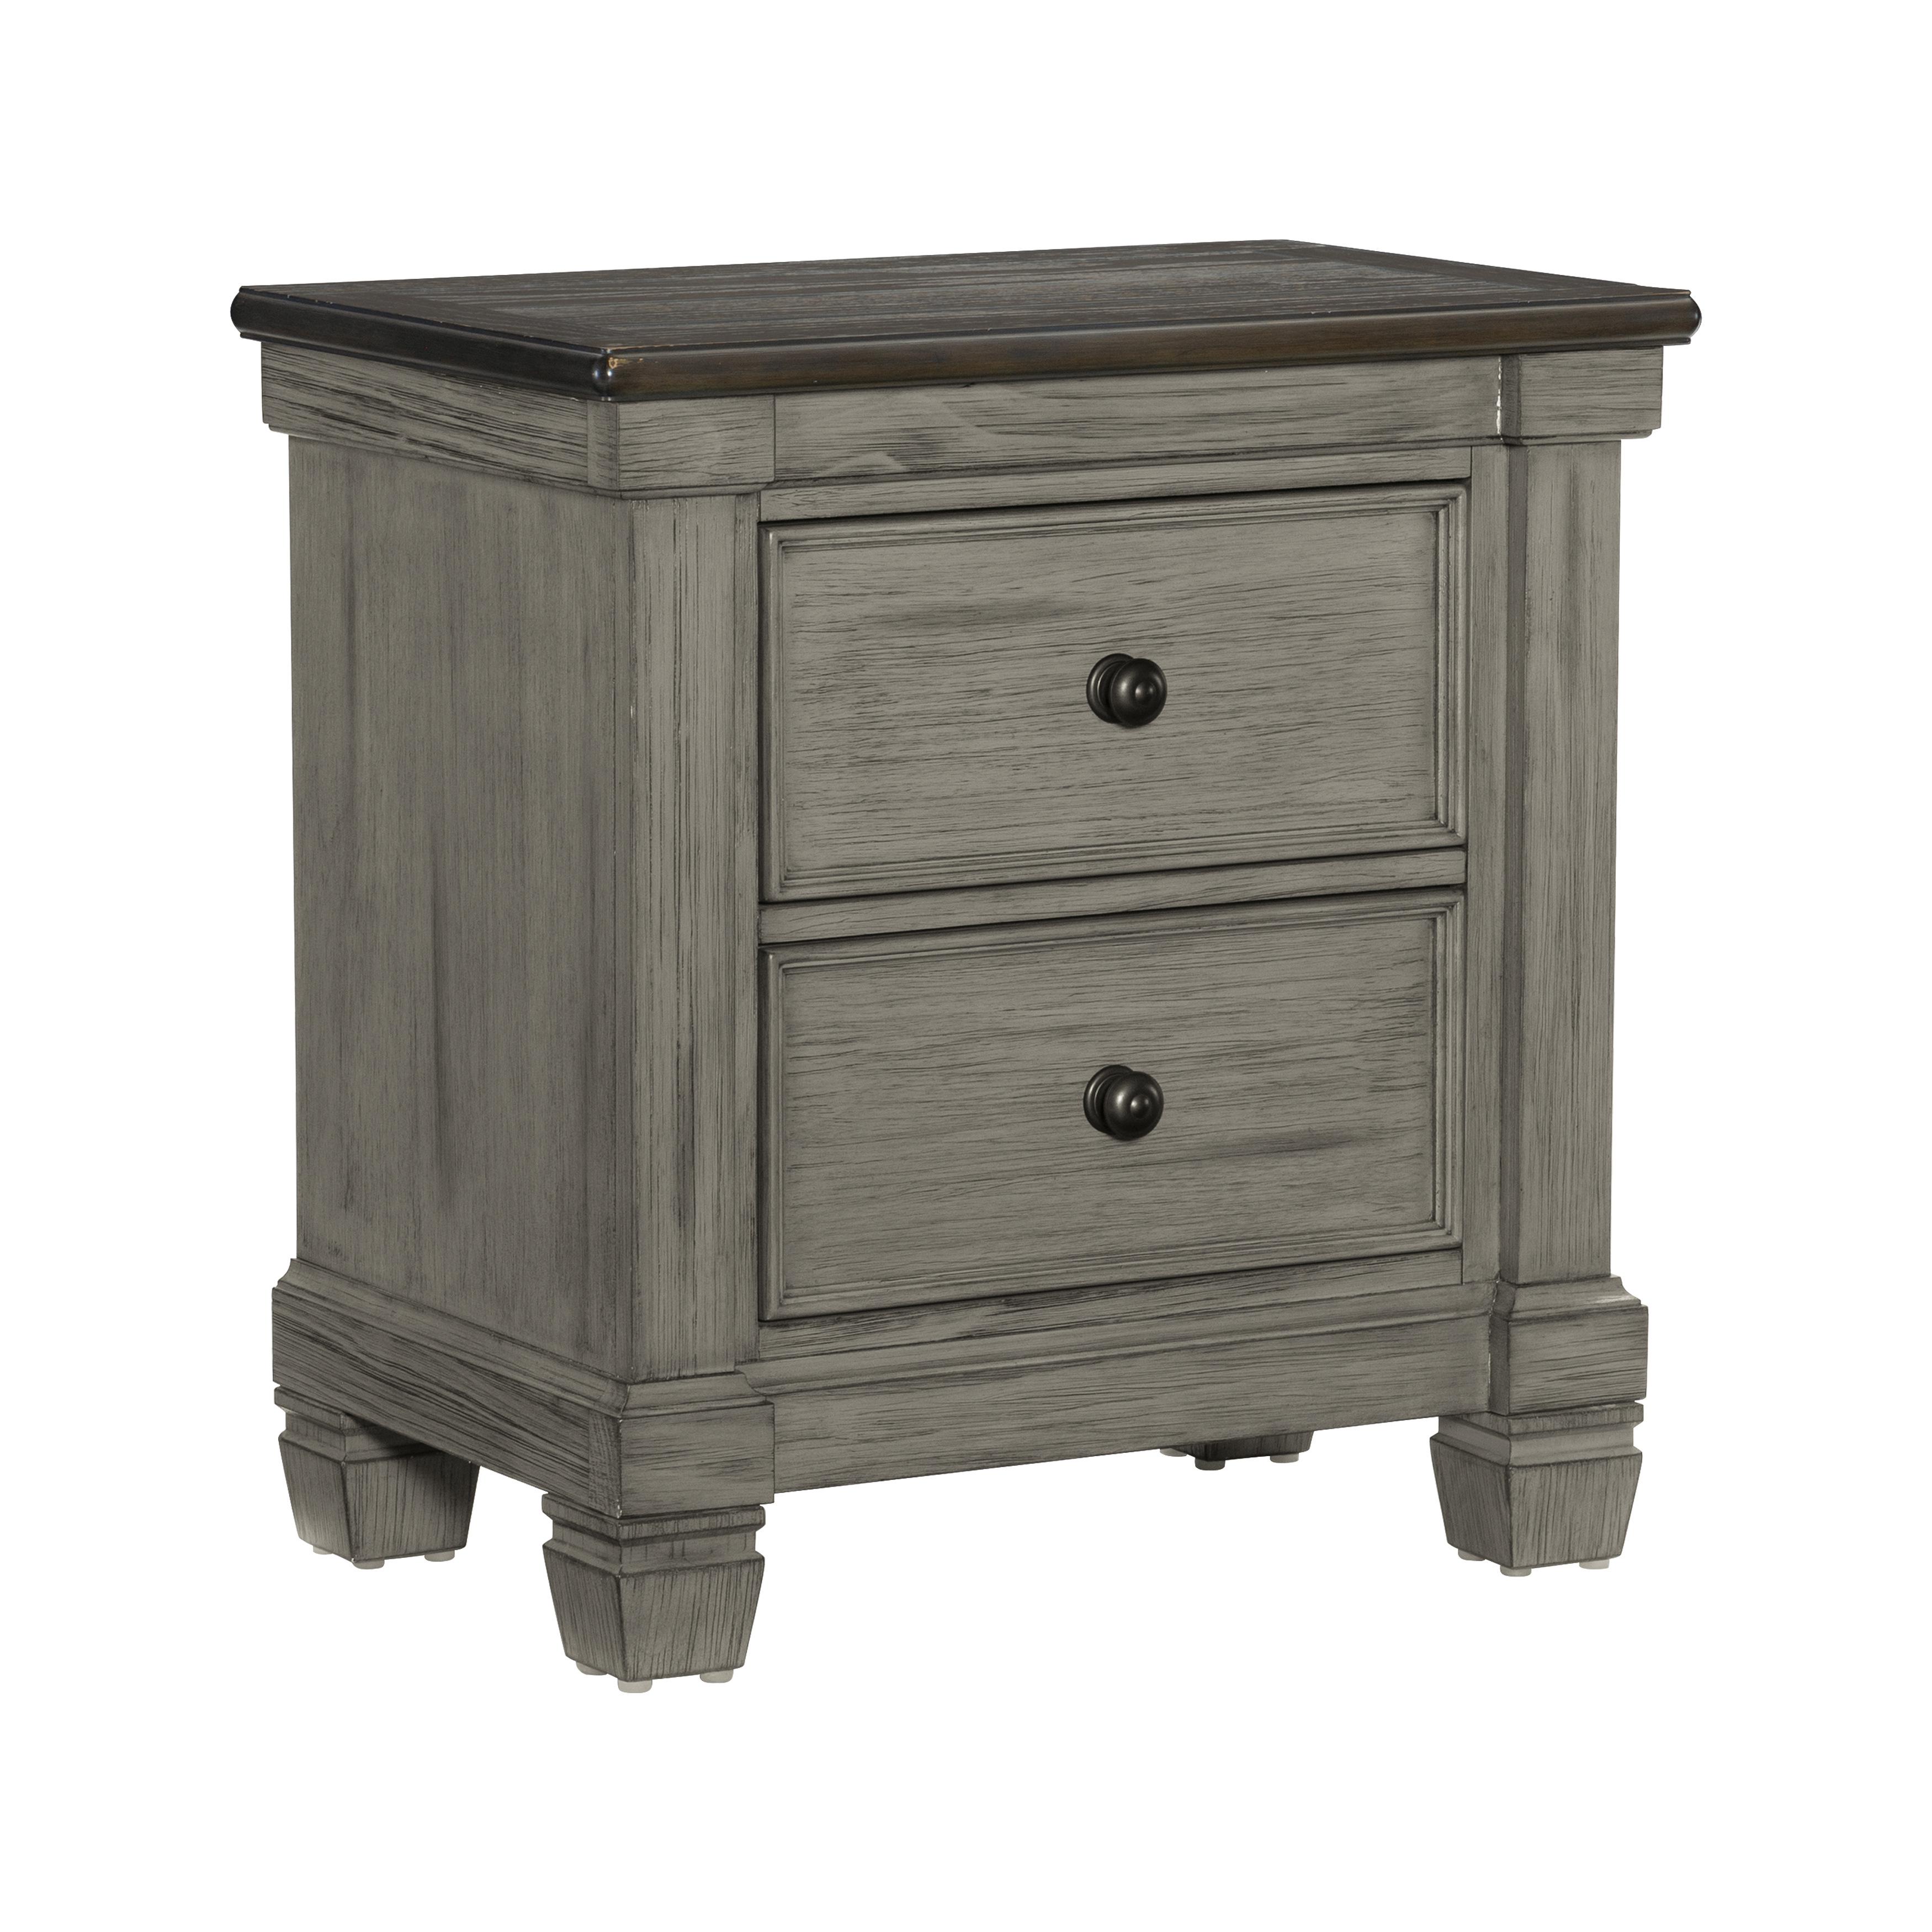 Transitional Nightstand 1626GY-4 Weaver 1626GY-4 in Gray, Coffee 